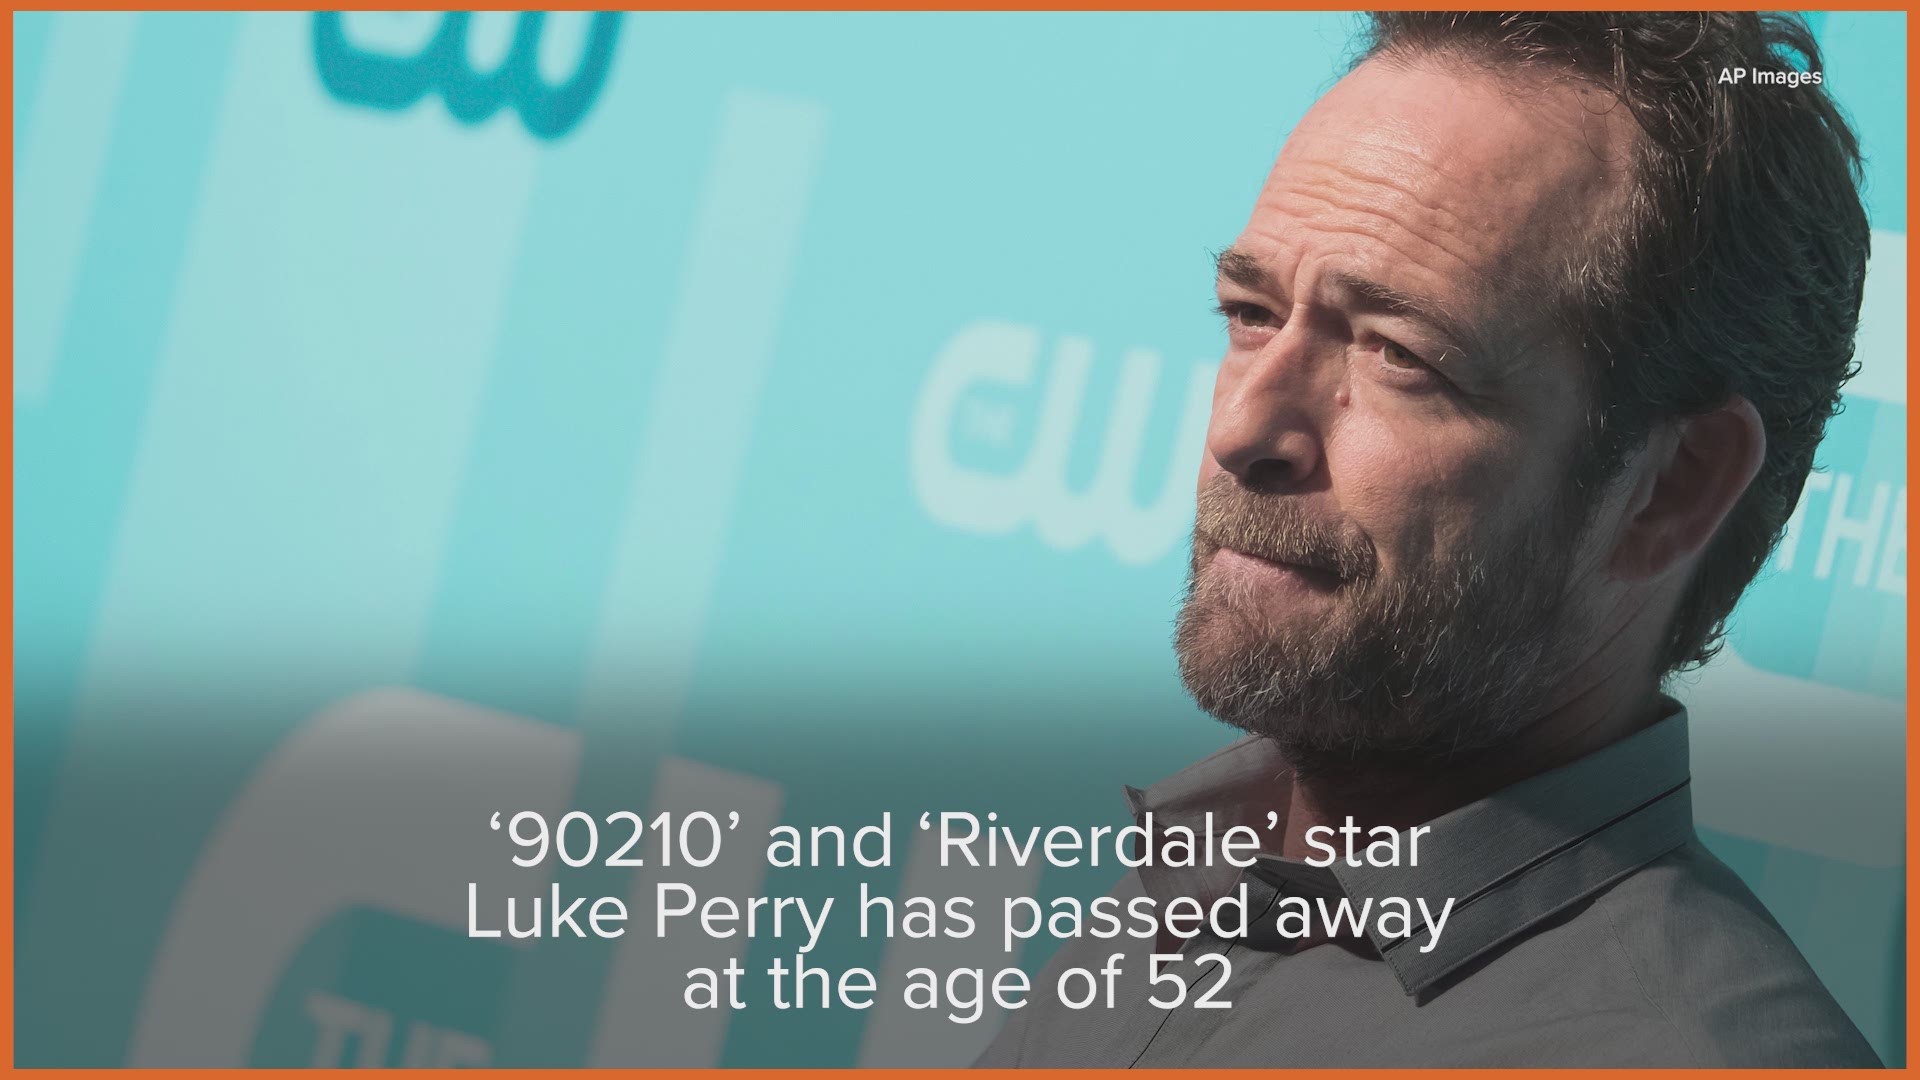 Luke Perry, who had his breakthrough role in 'Beverly Hills, 90210,' died days after suffering a stroke.